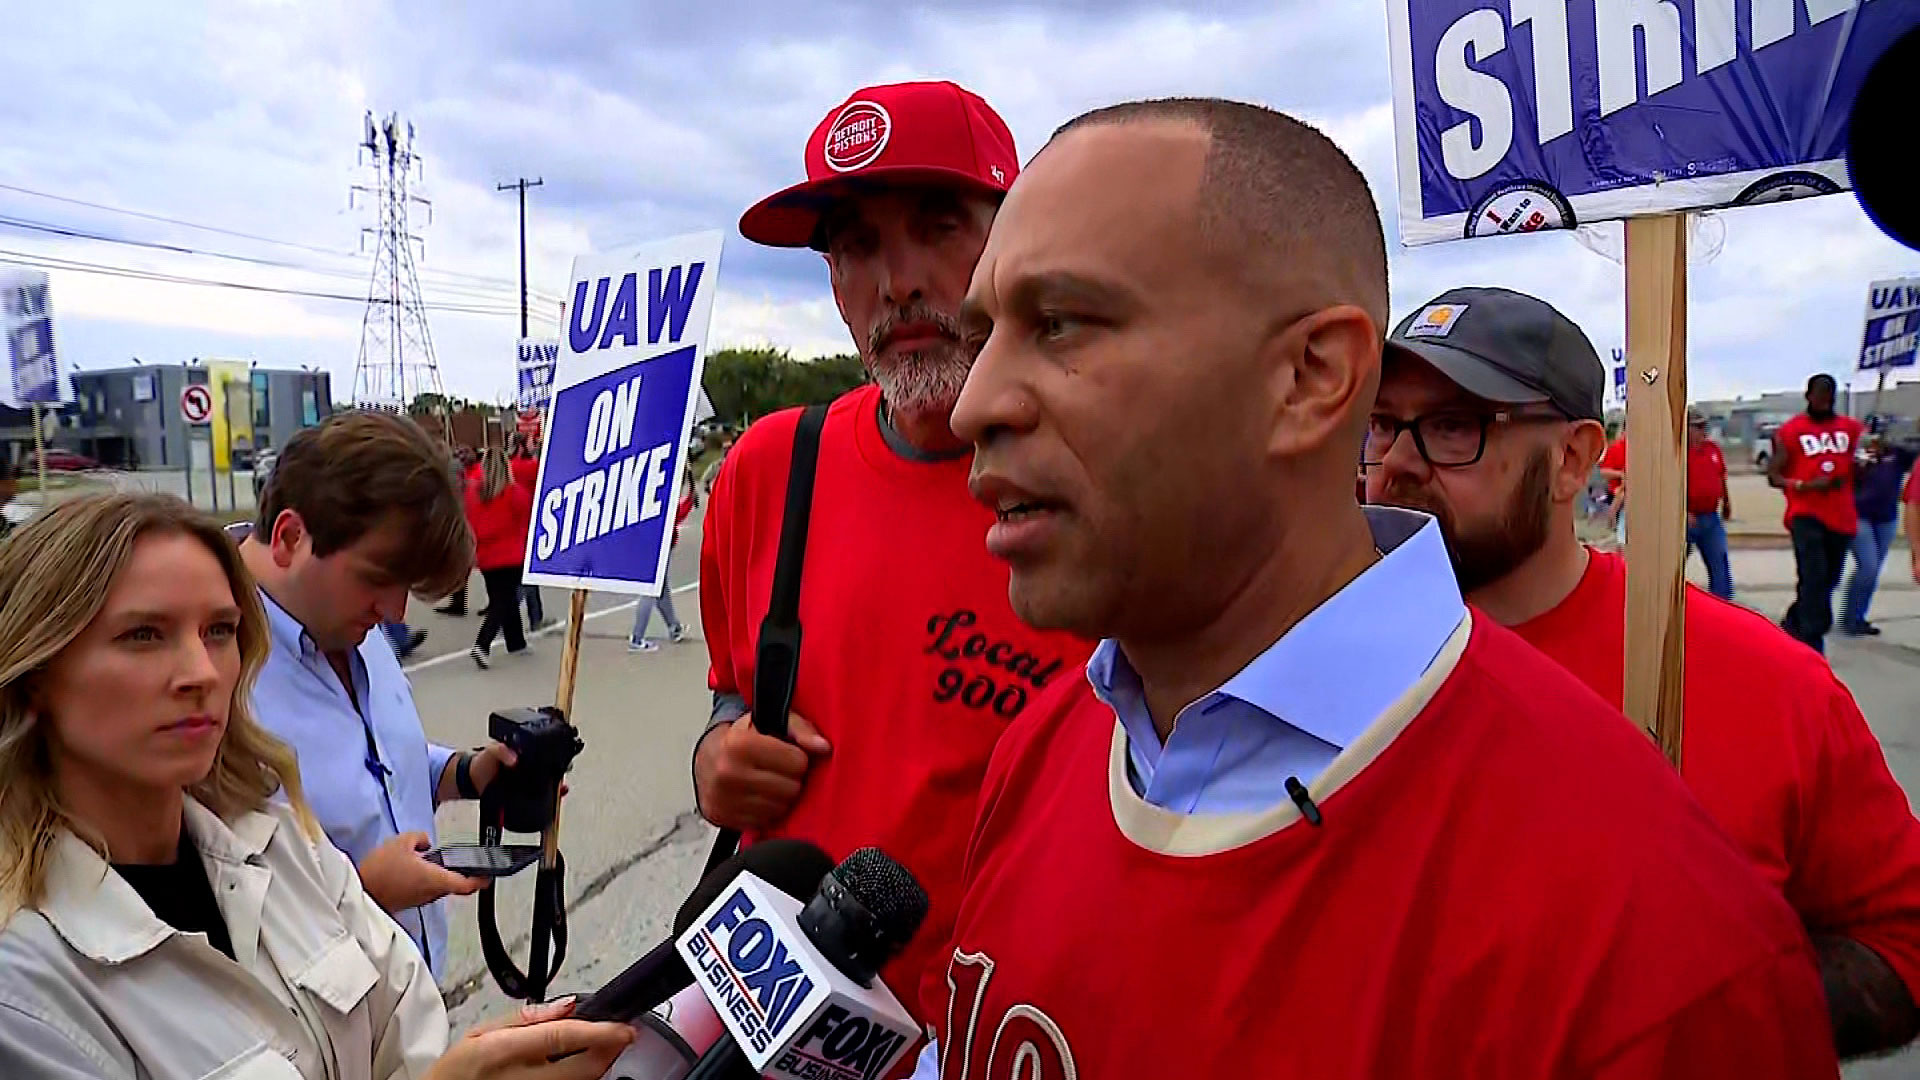 House Minority leader Hakeem Jeffries speaks to reporters while attending a UAW picket line in Wayne, Michigan, on Sunday, September 17.